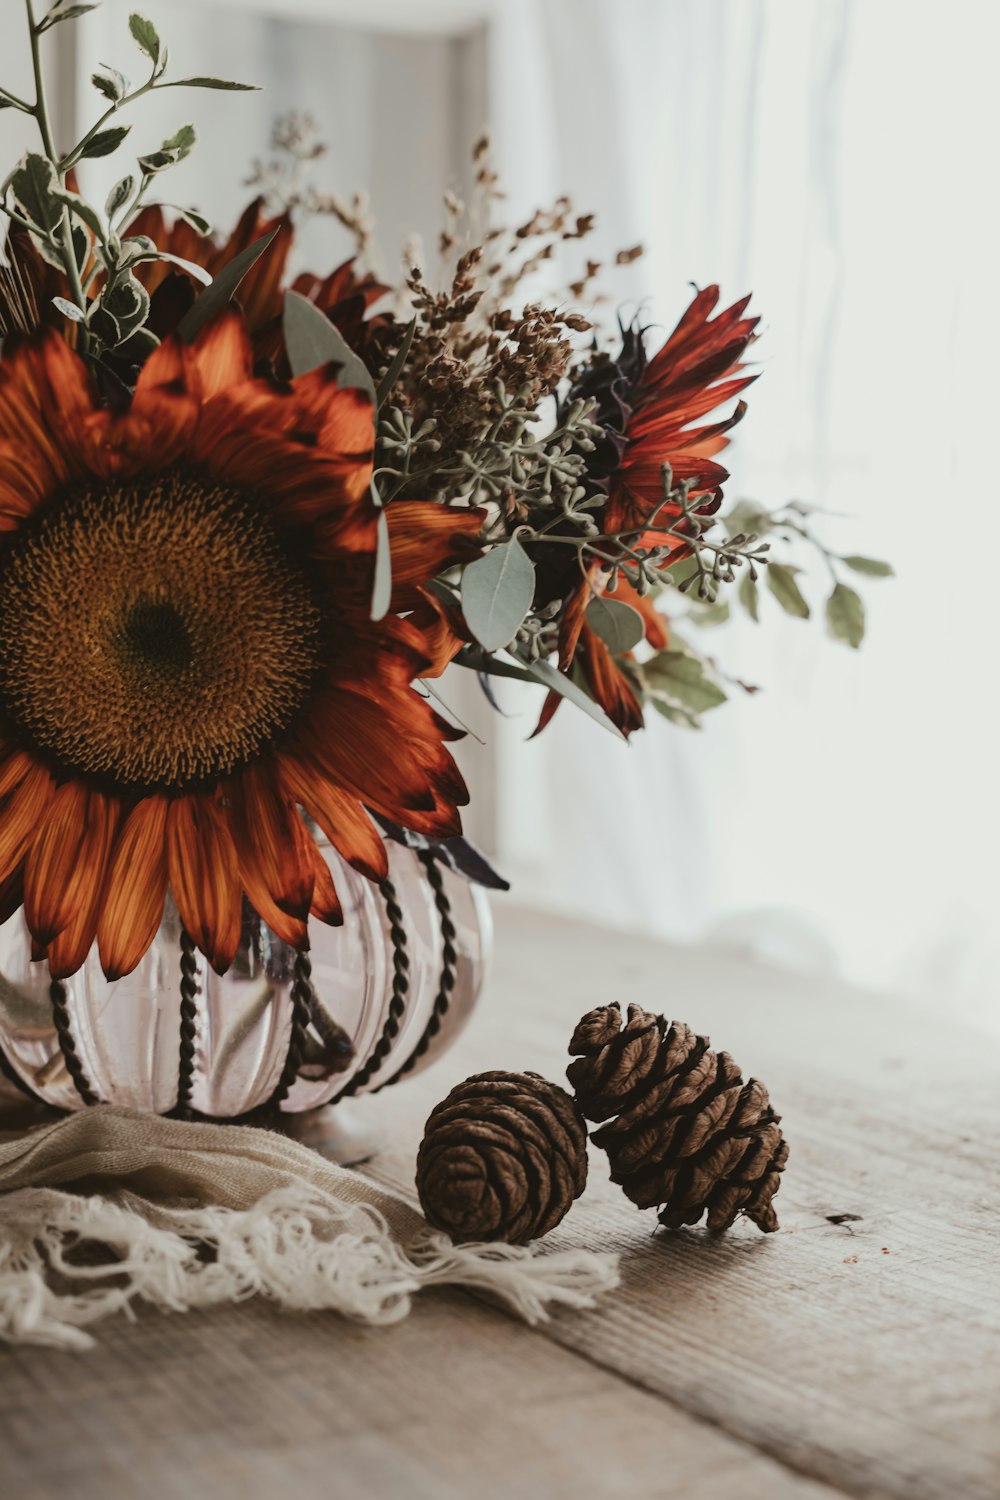 a vase with a sunflower and pine cones on a table